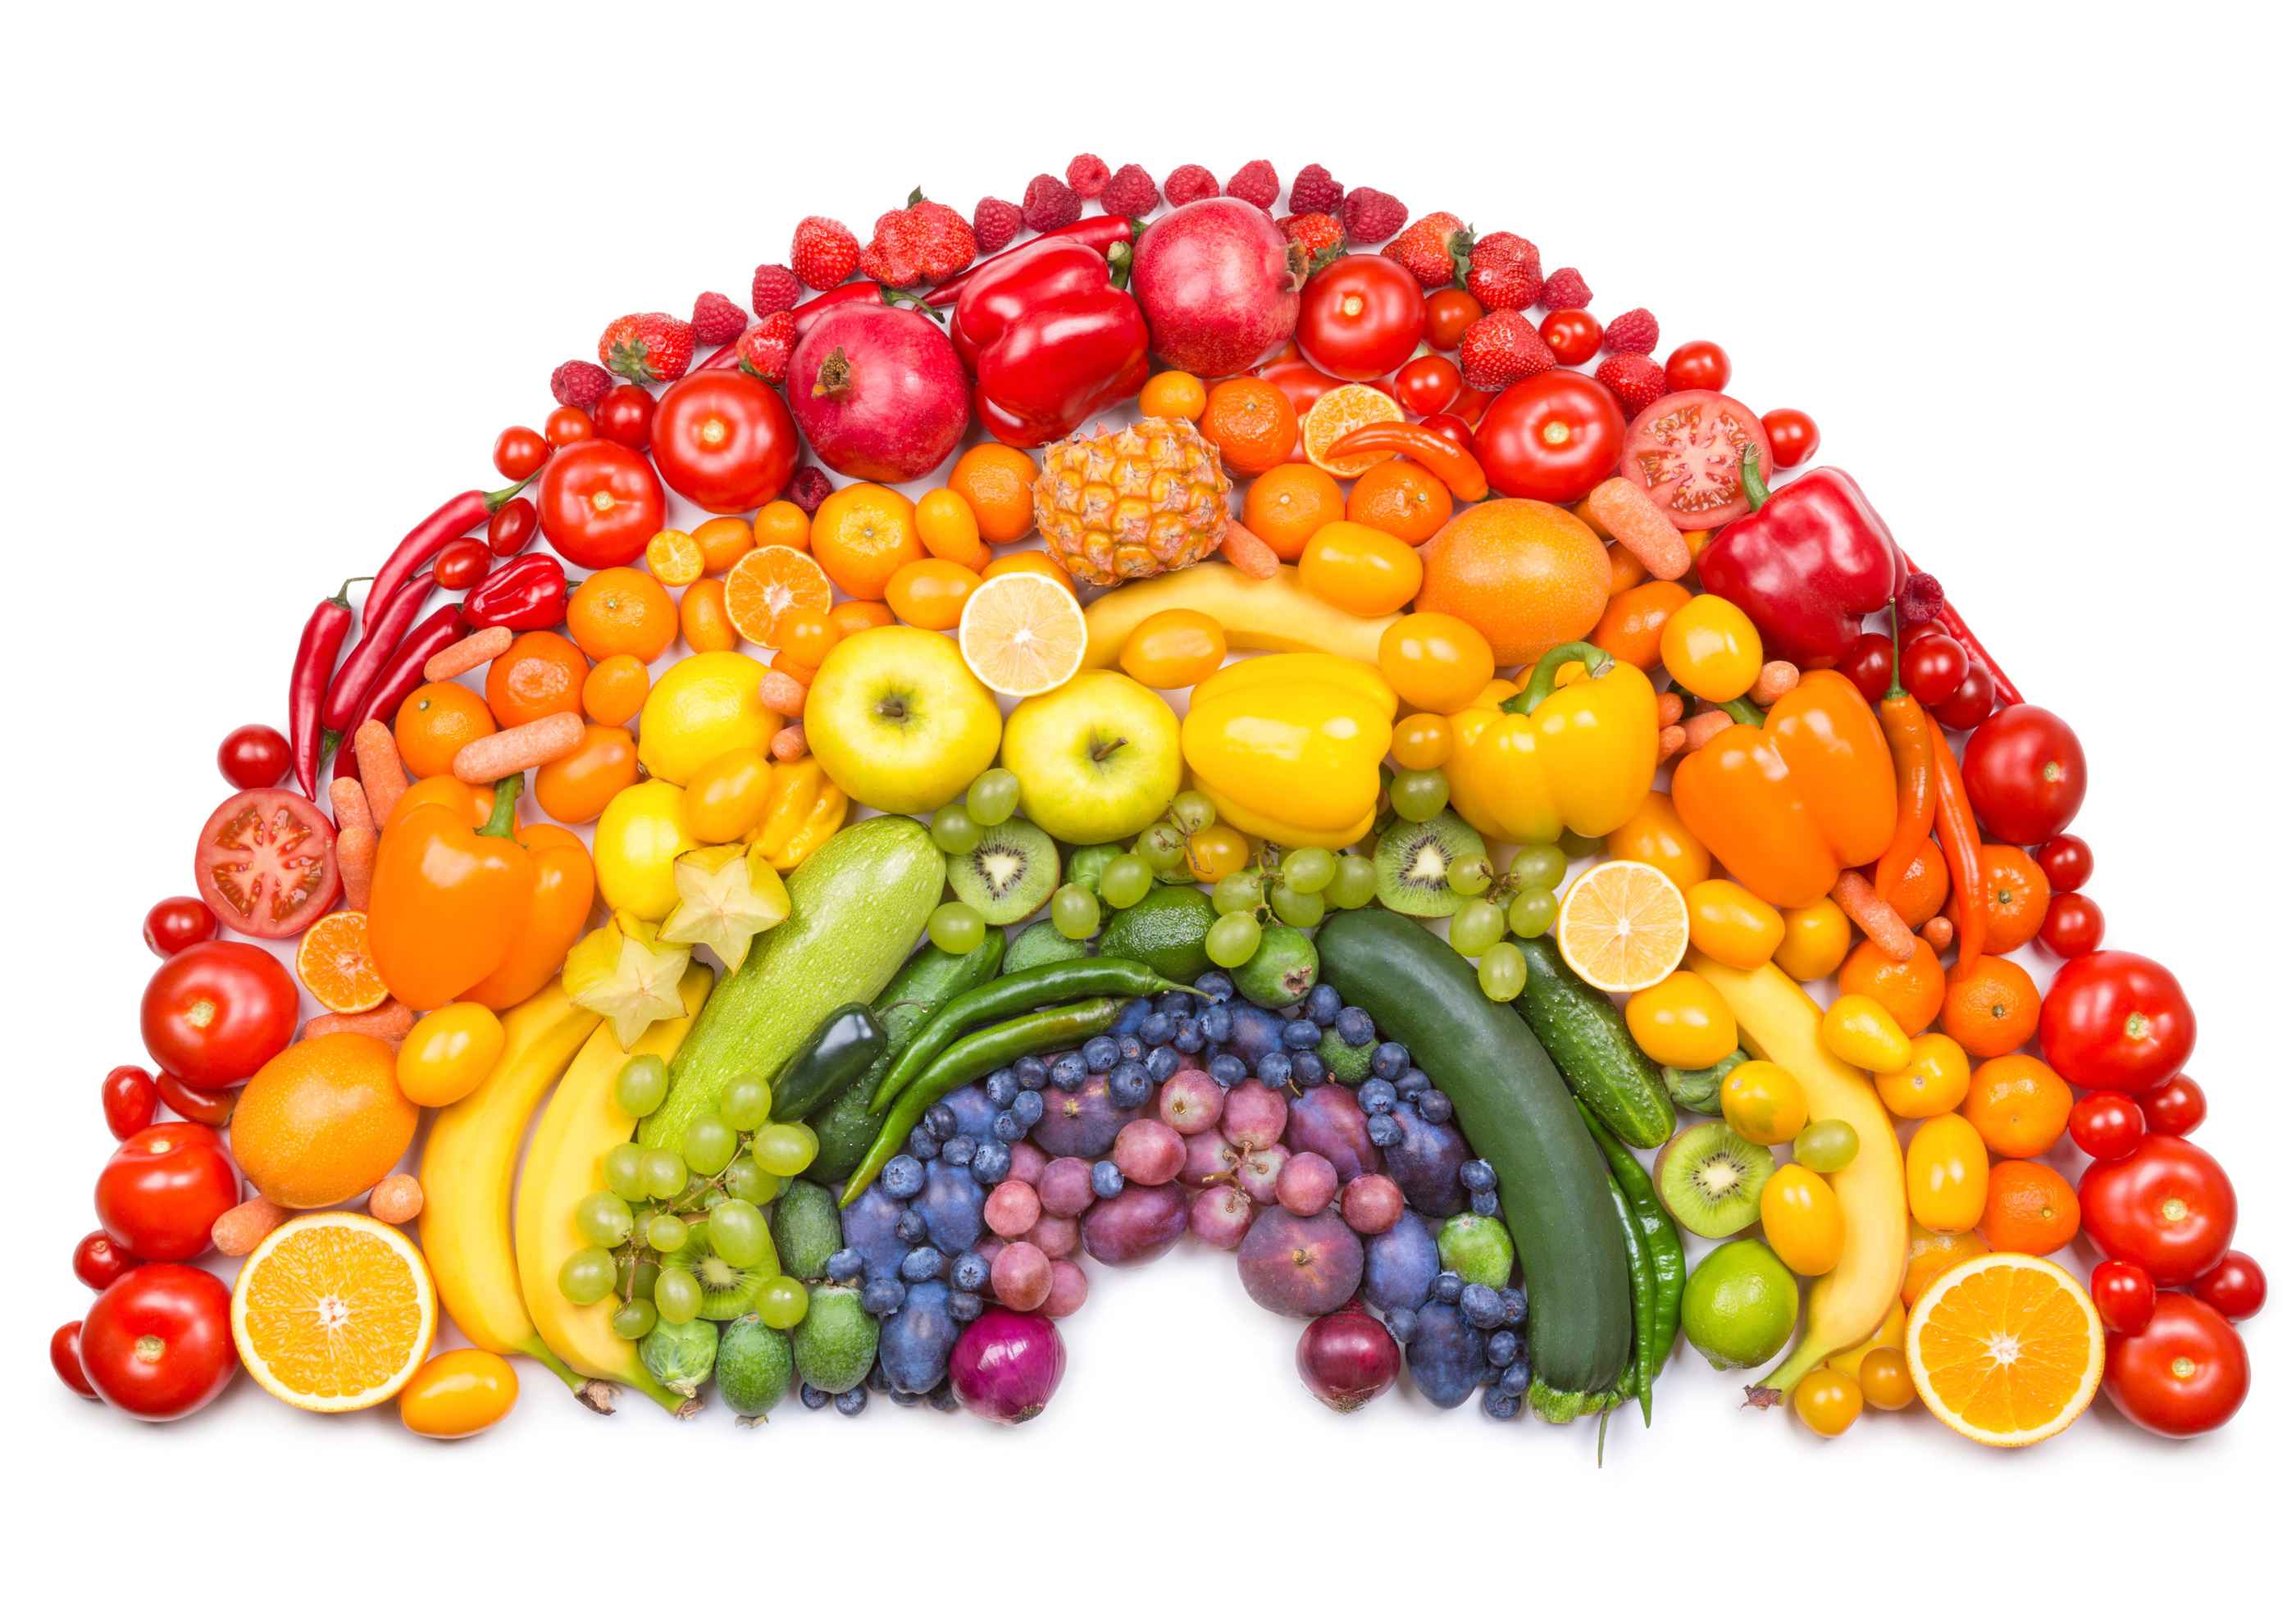 A rainbow made of fruit and vegetables on a white backdrop